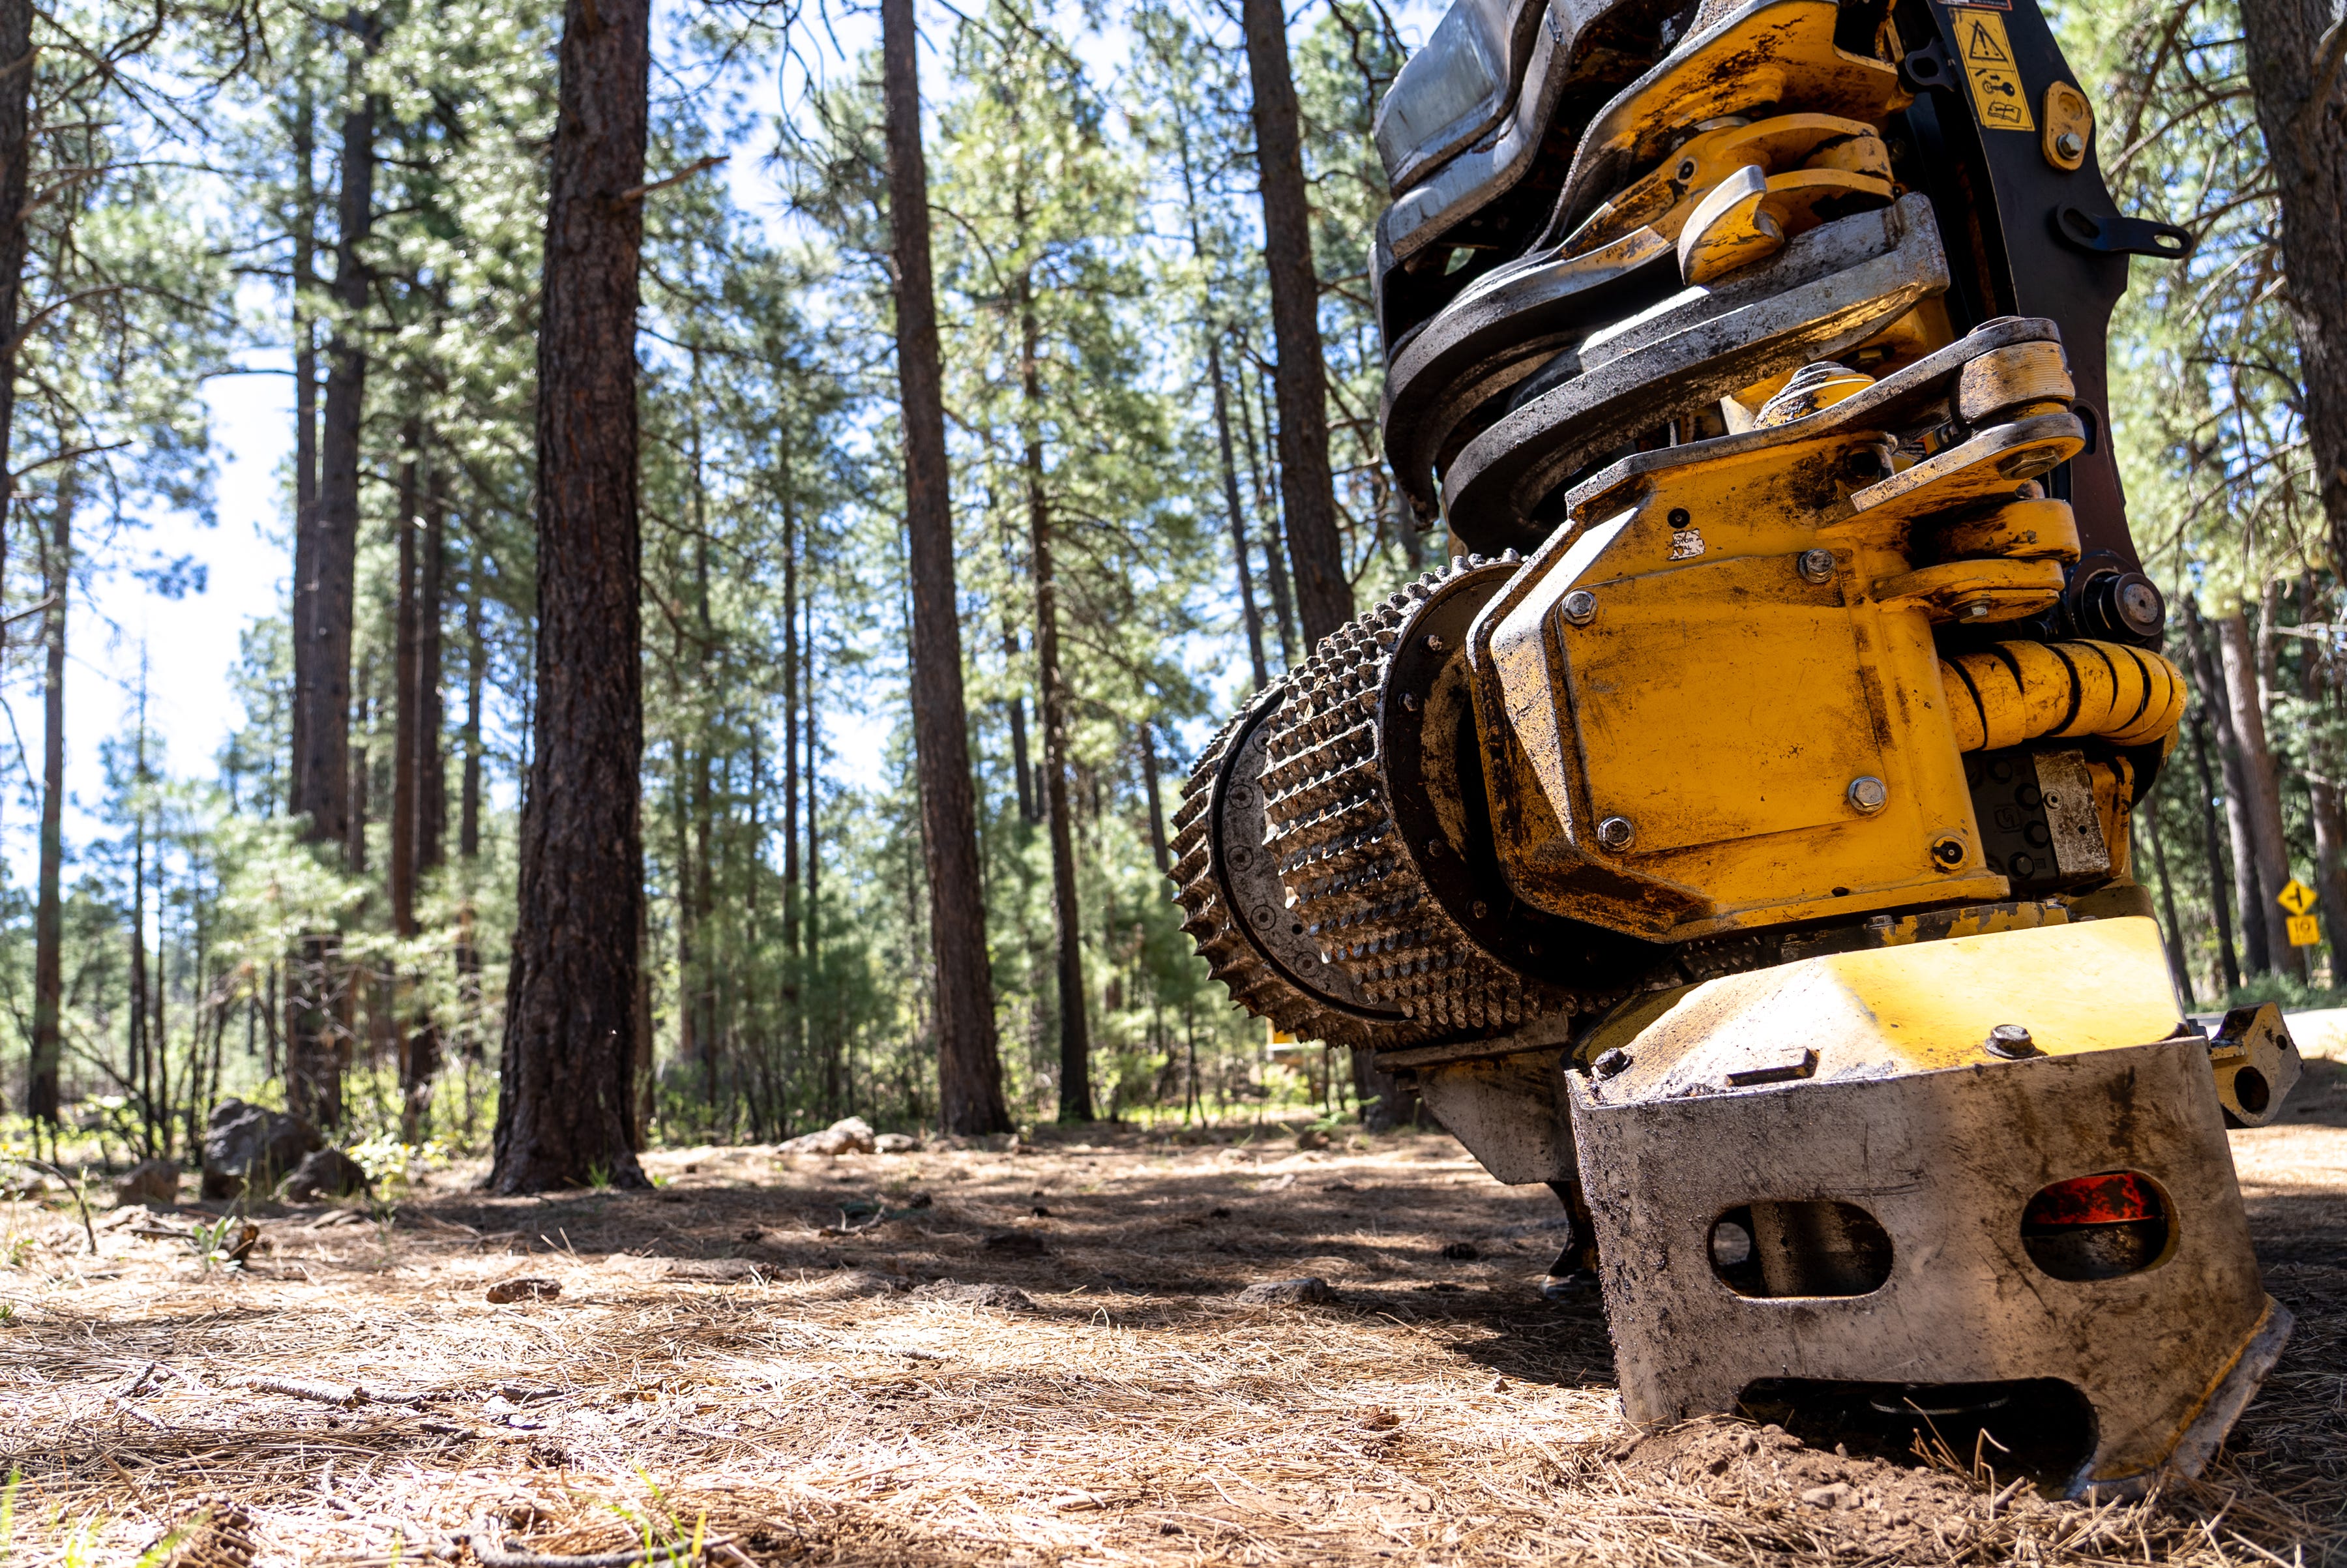 Tree logging equipment is stationed within Baker Butte near the Mogollon Rim, part of the Coconino National Forest on May 16, 2022.